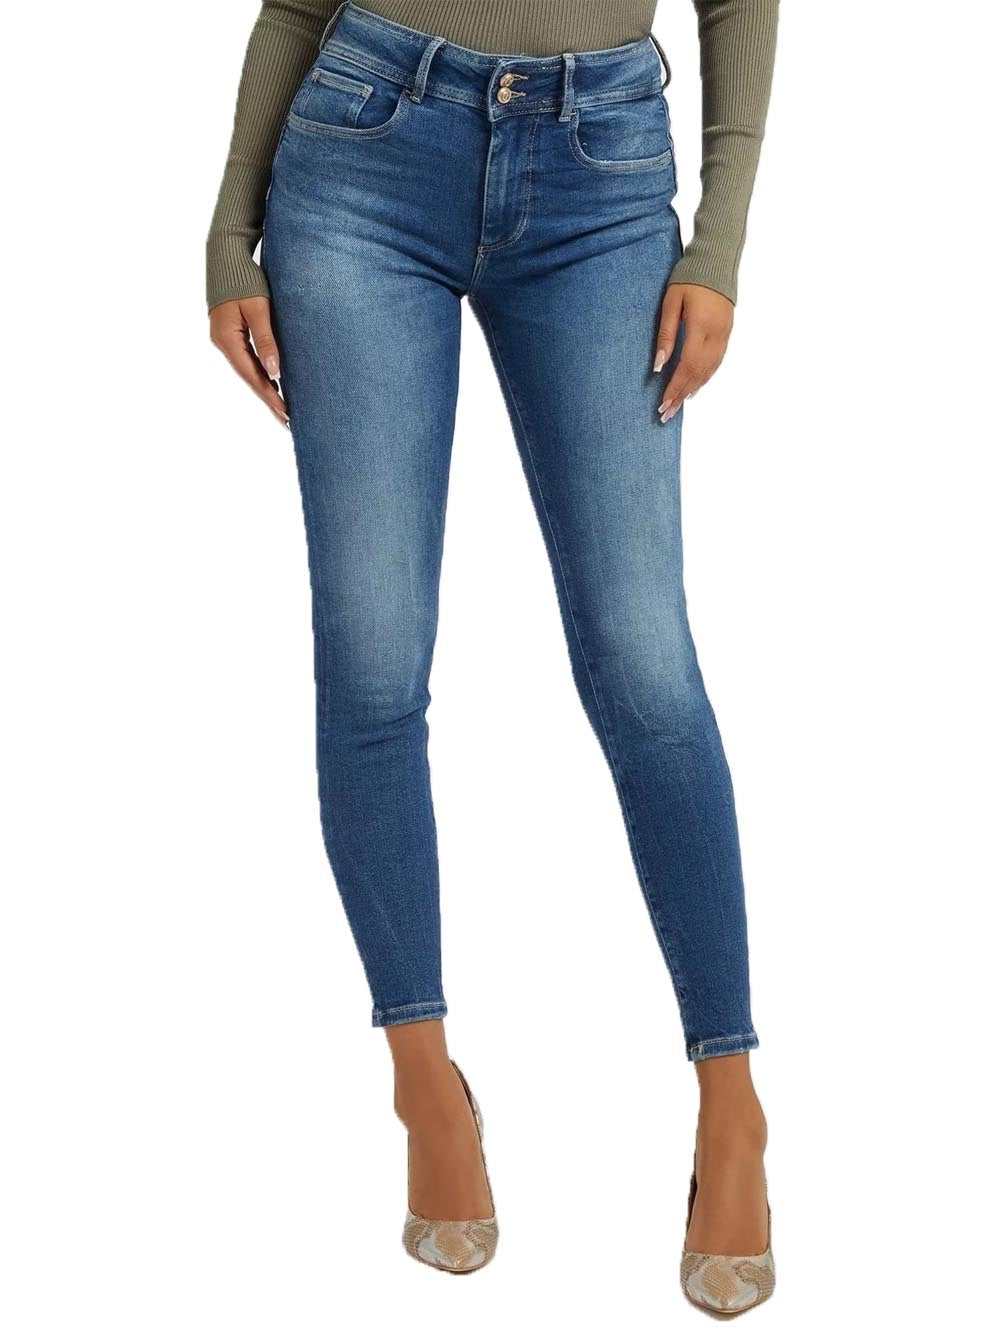 Guess Jeans Donna Medio